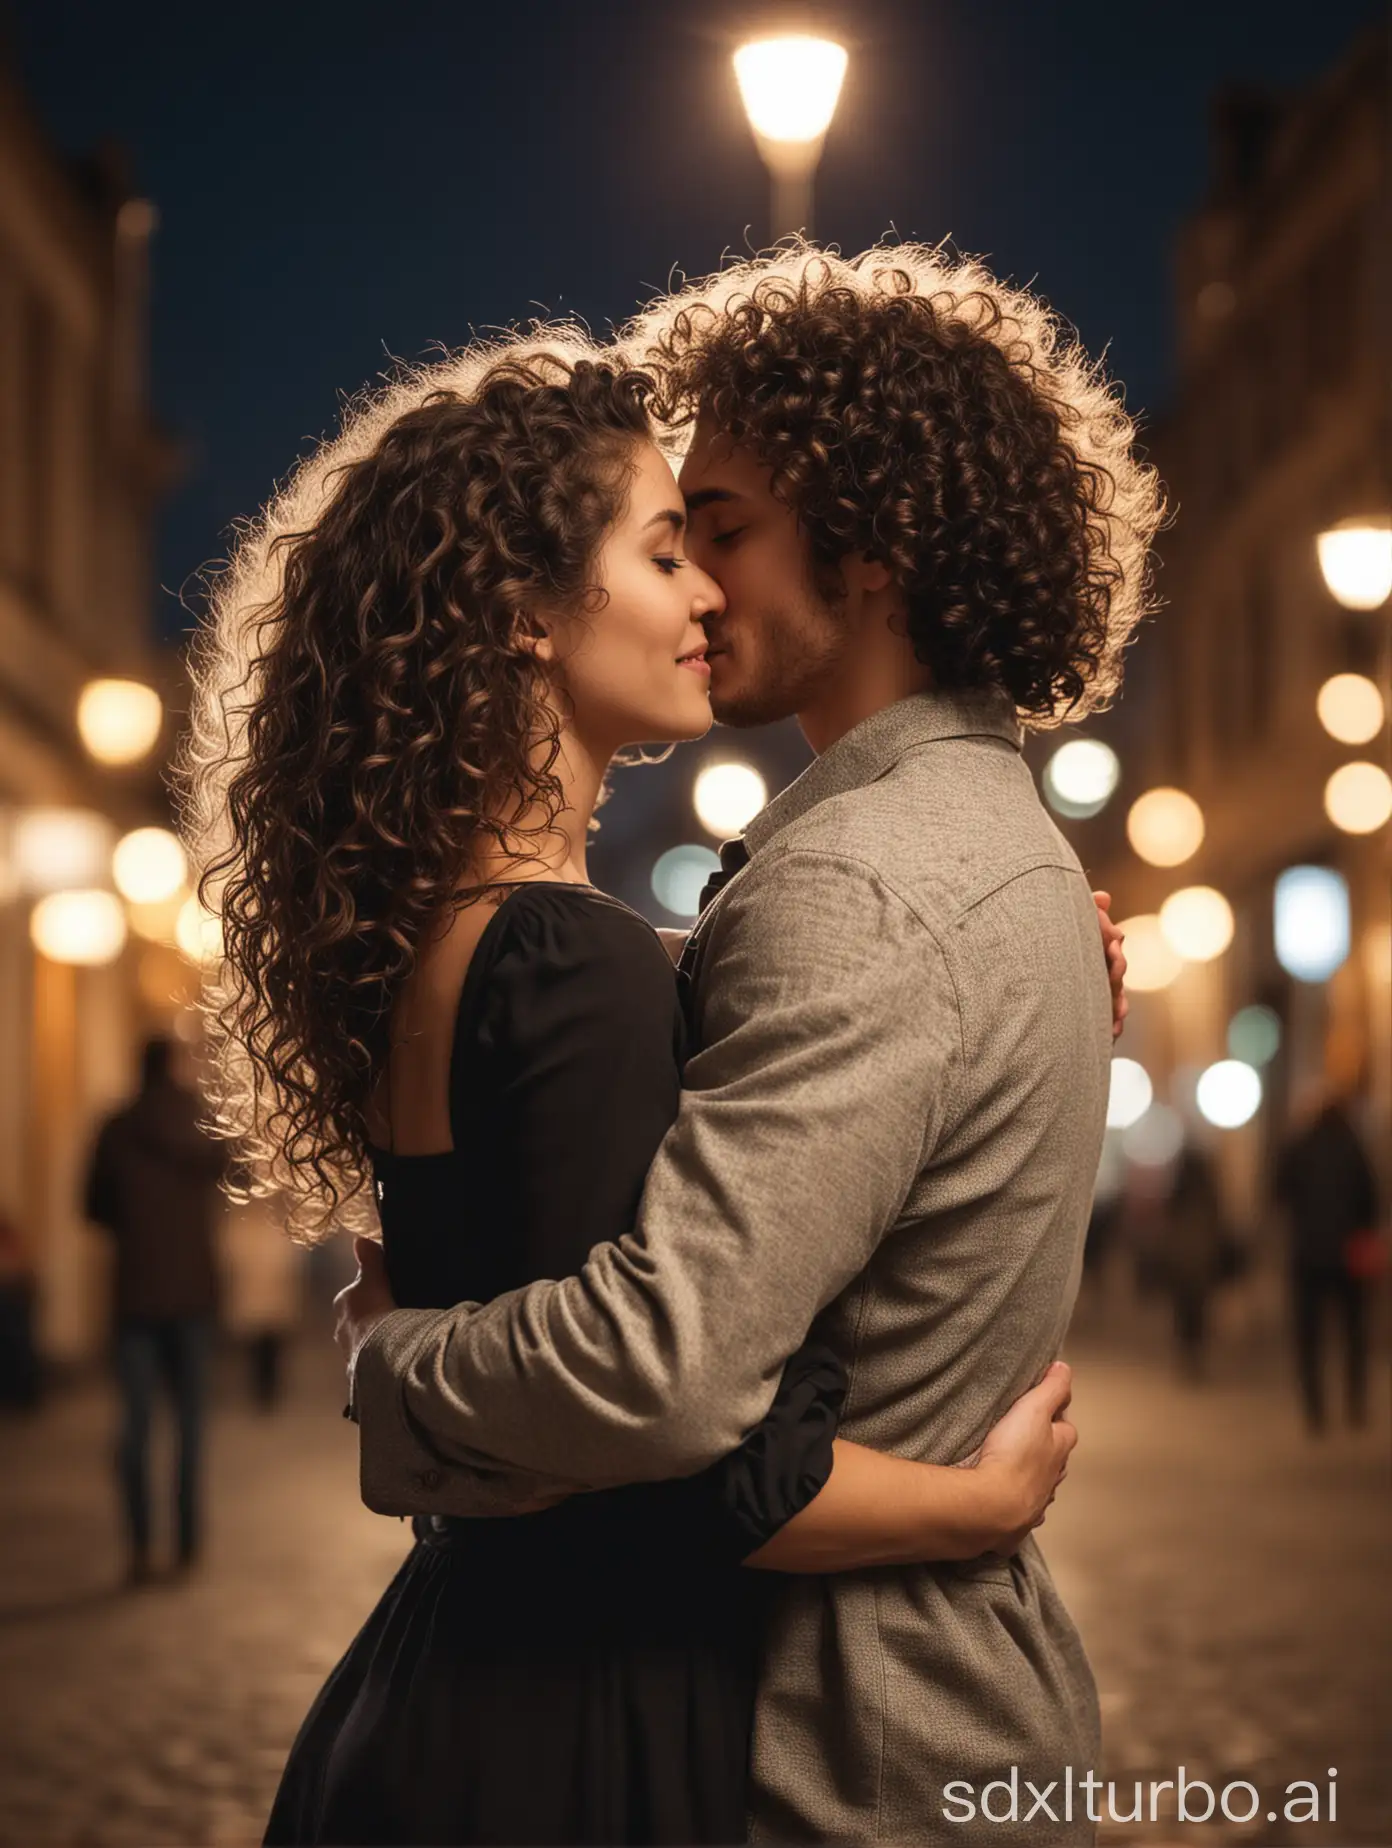 woman and a curly man hugging, romantic, background city light bokeh, back view, view from the back